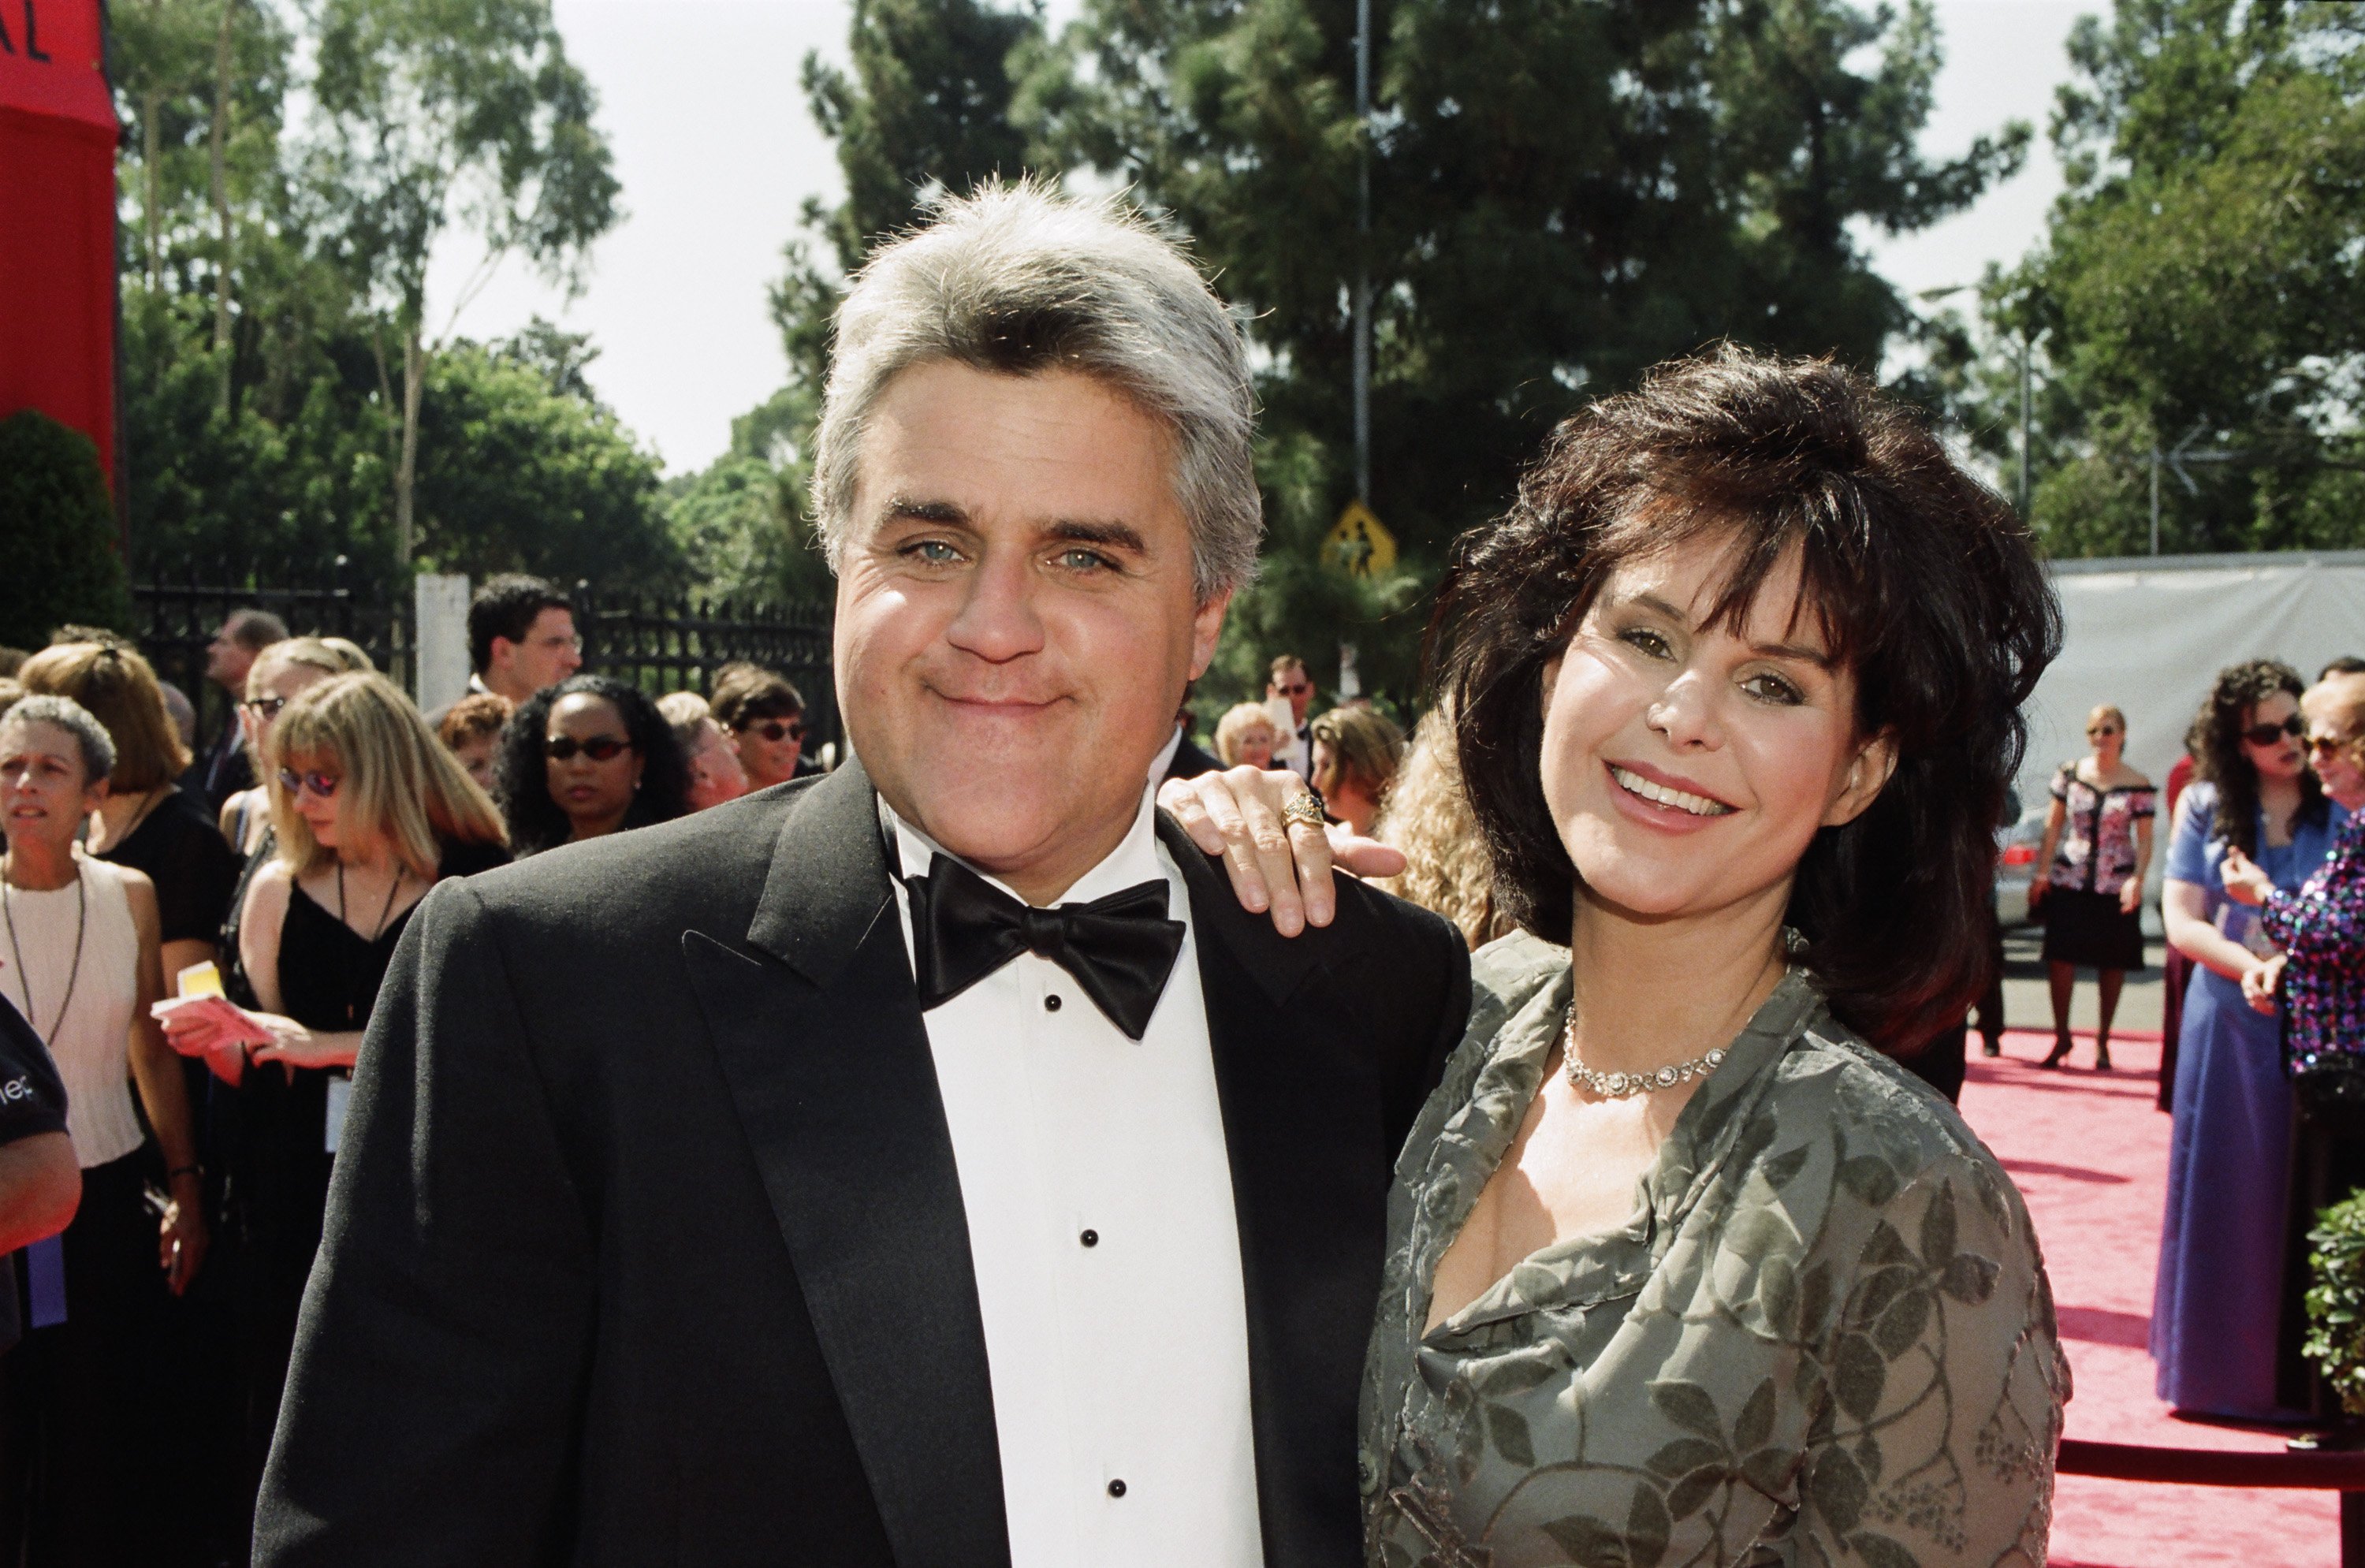 Jay Leno, Mavis Leno arrive at the 50th Annual Primetime Emmy Awards held at the Shrine Auditorium in Los Angeles, CA on September 13, 1998. | Source: Getty Images